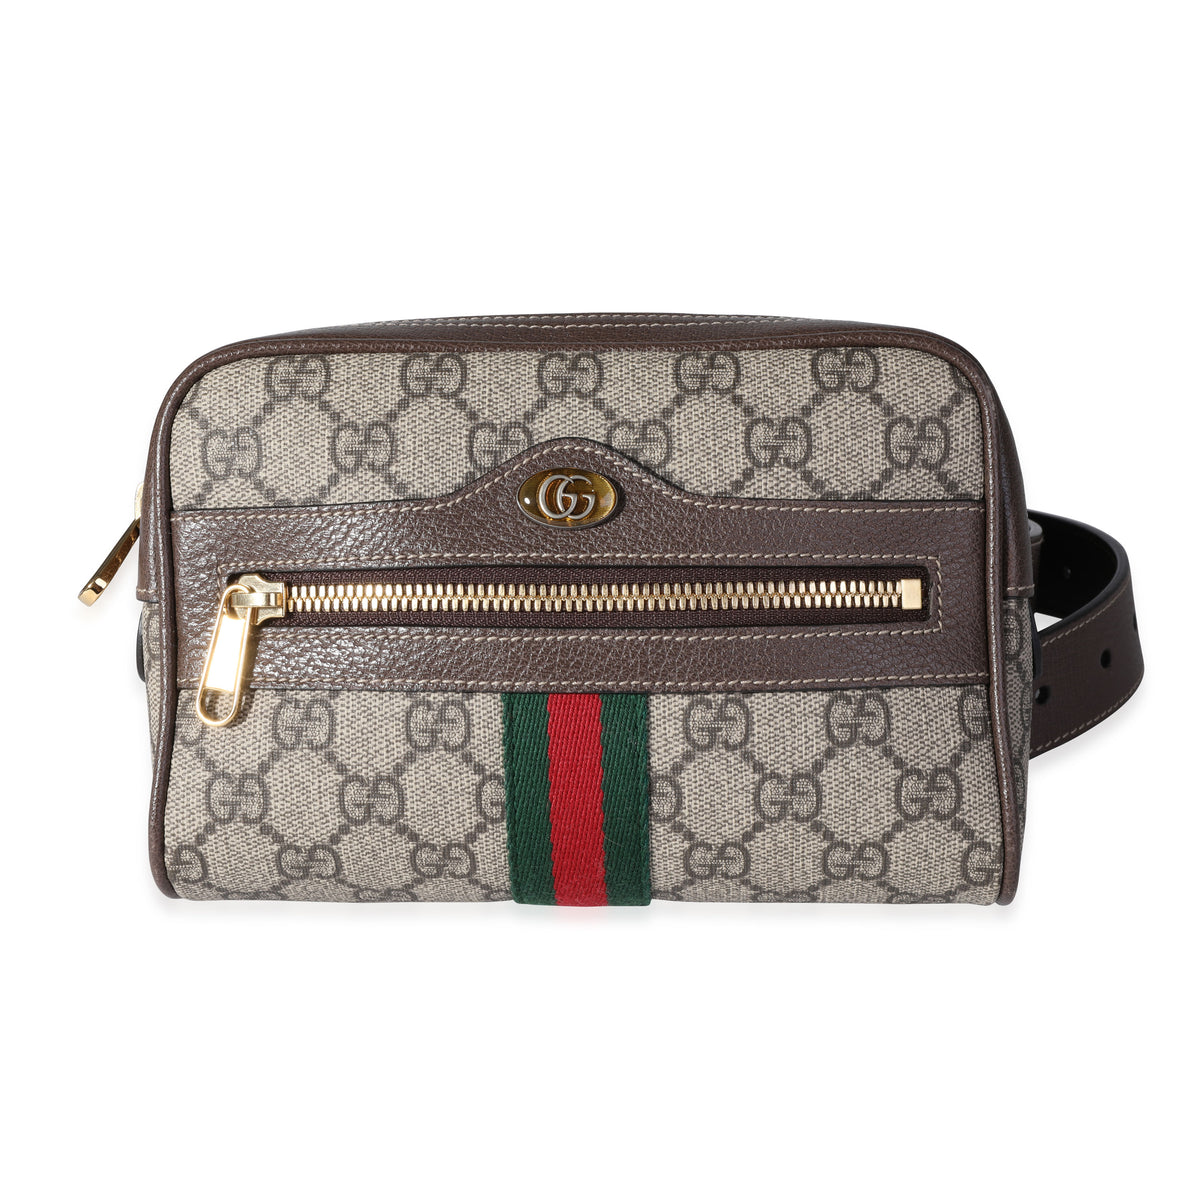 Gucci Brown GG Supreme Ophidia Small Belt Bag 75/30